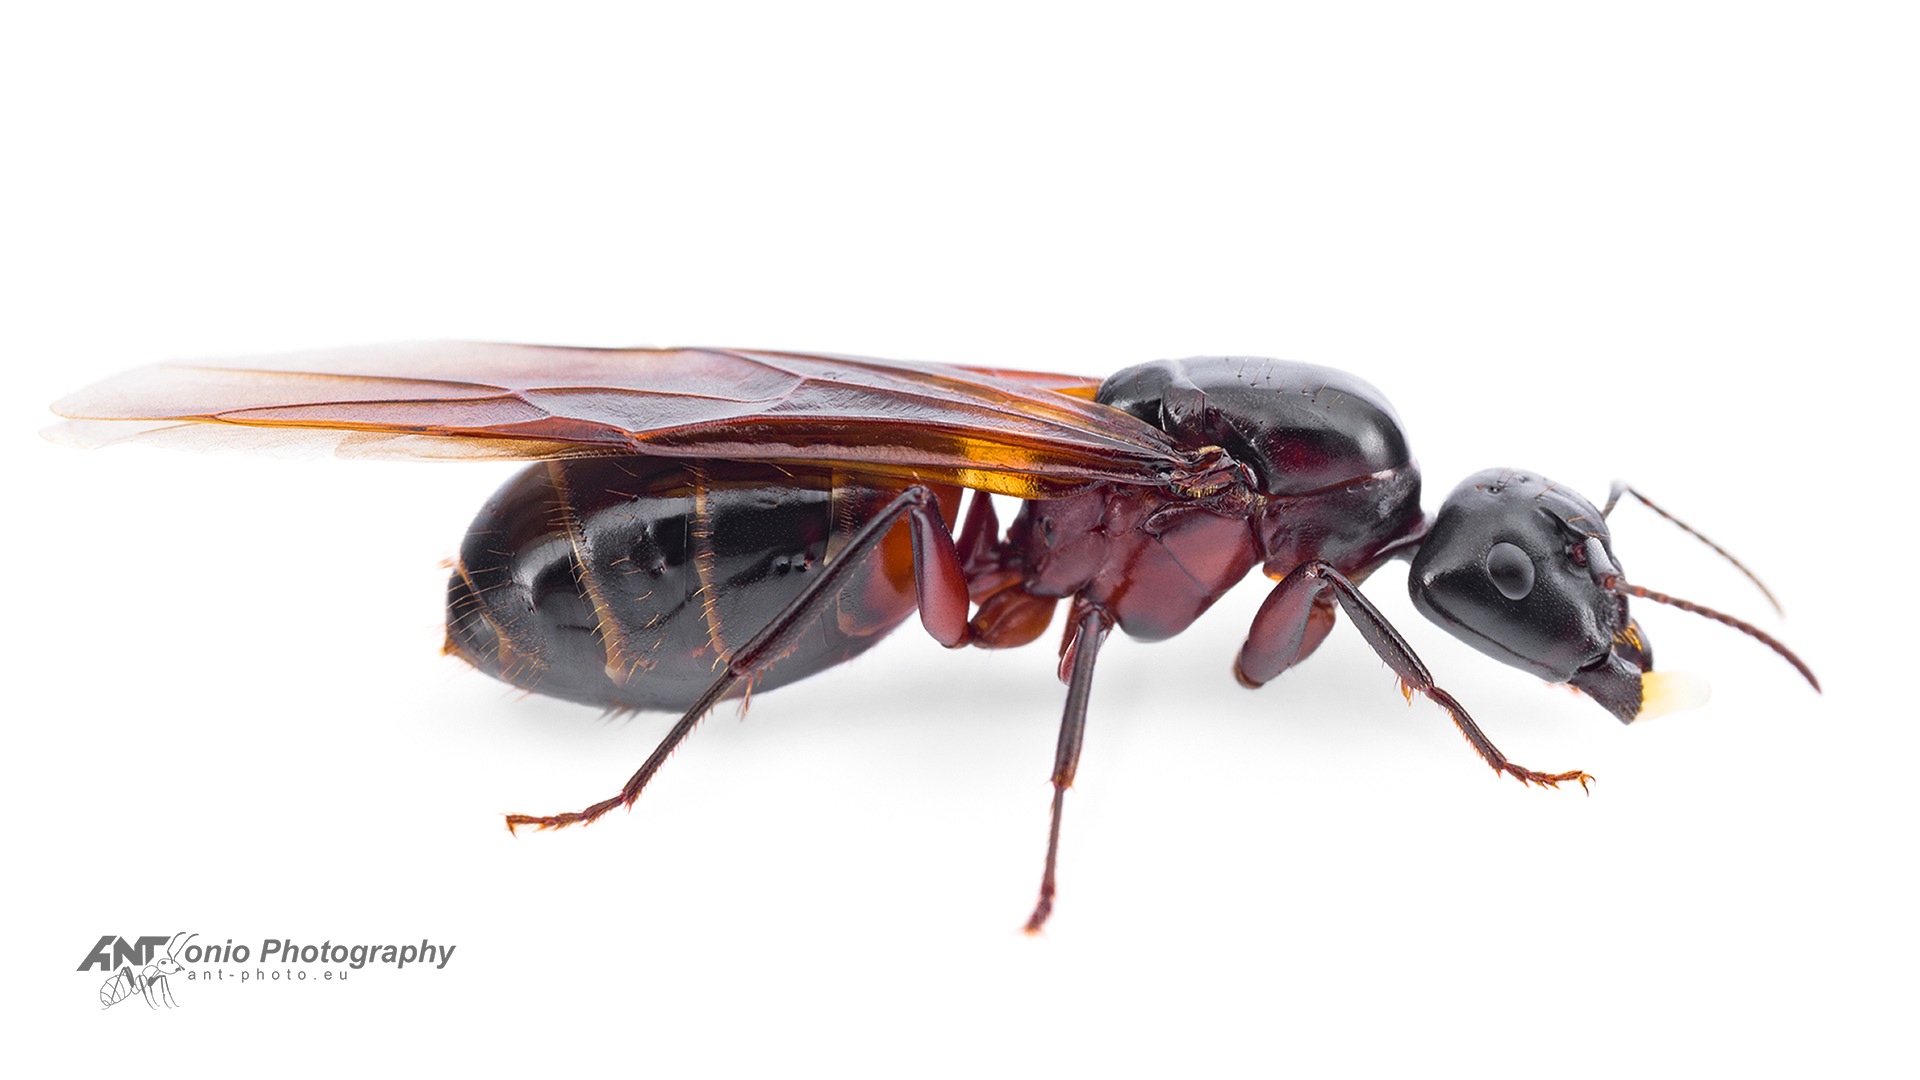 Winged Camponotus ligniperda queen holding an egg, side shot on white background